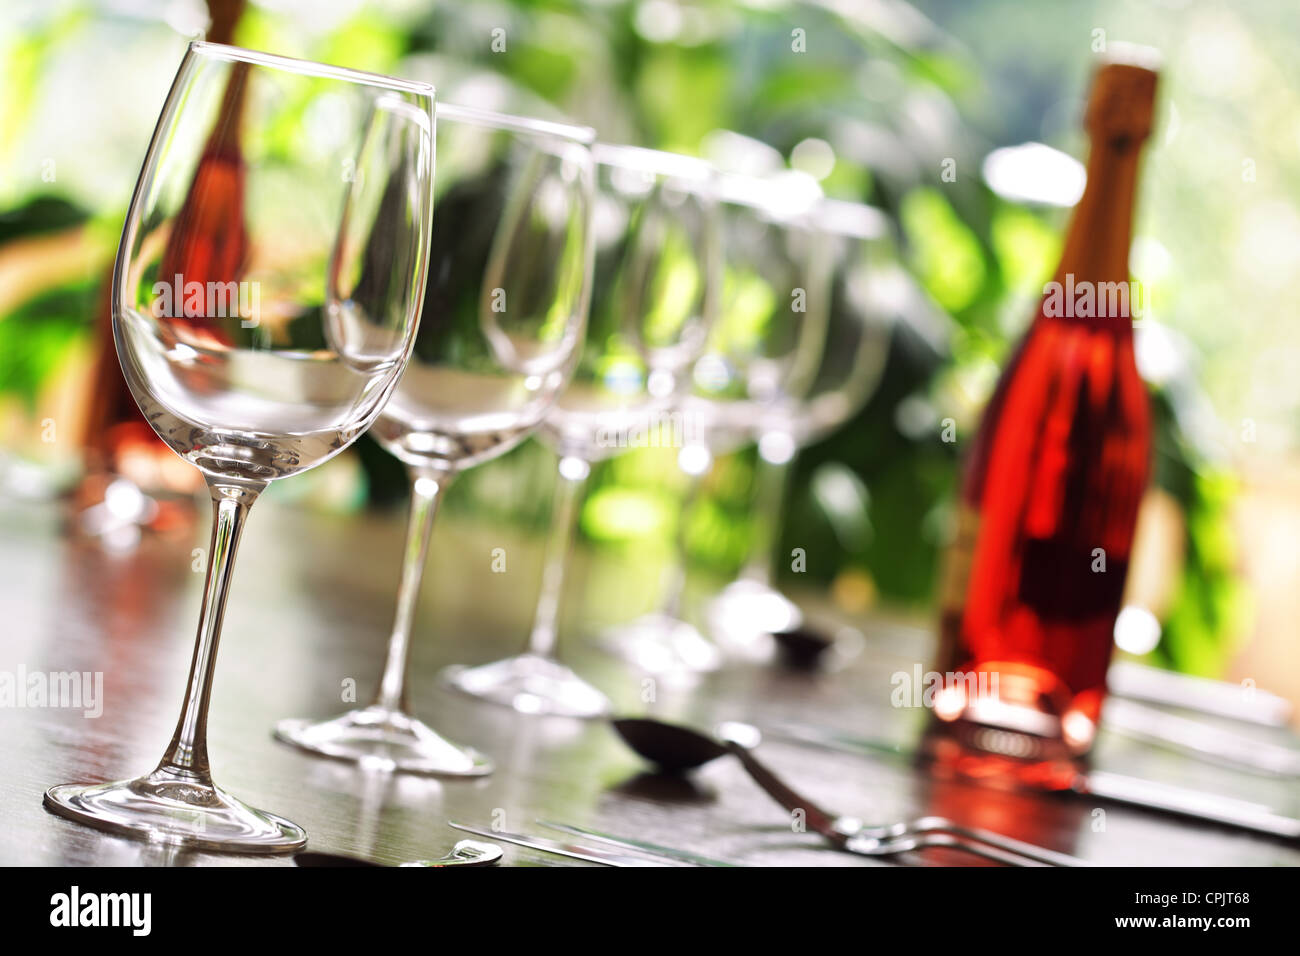 Wine glass and place settings Stock Photo